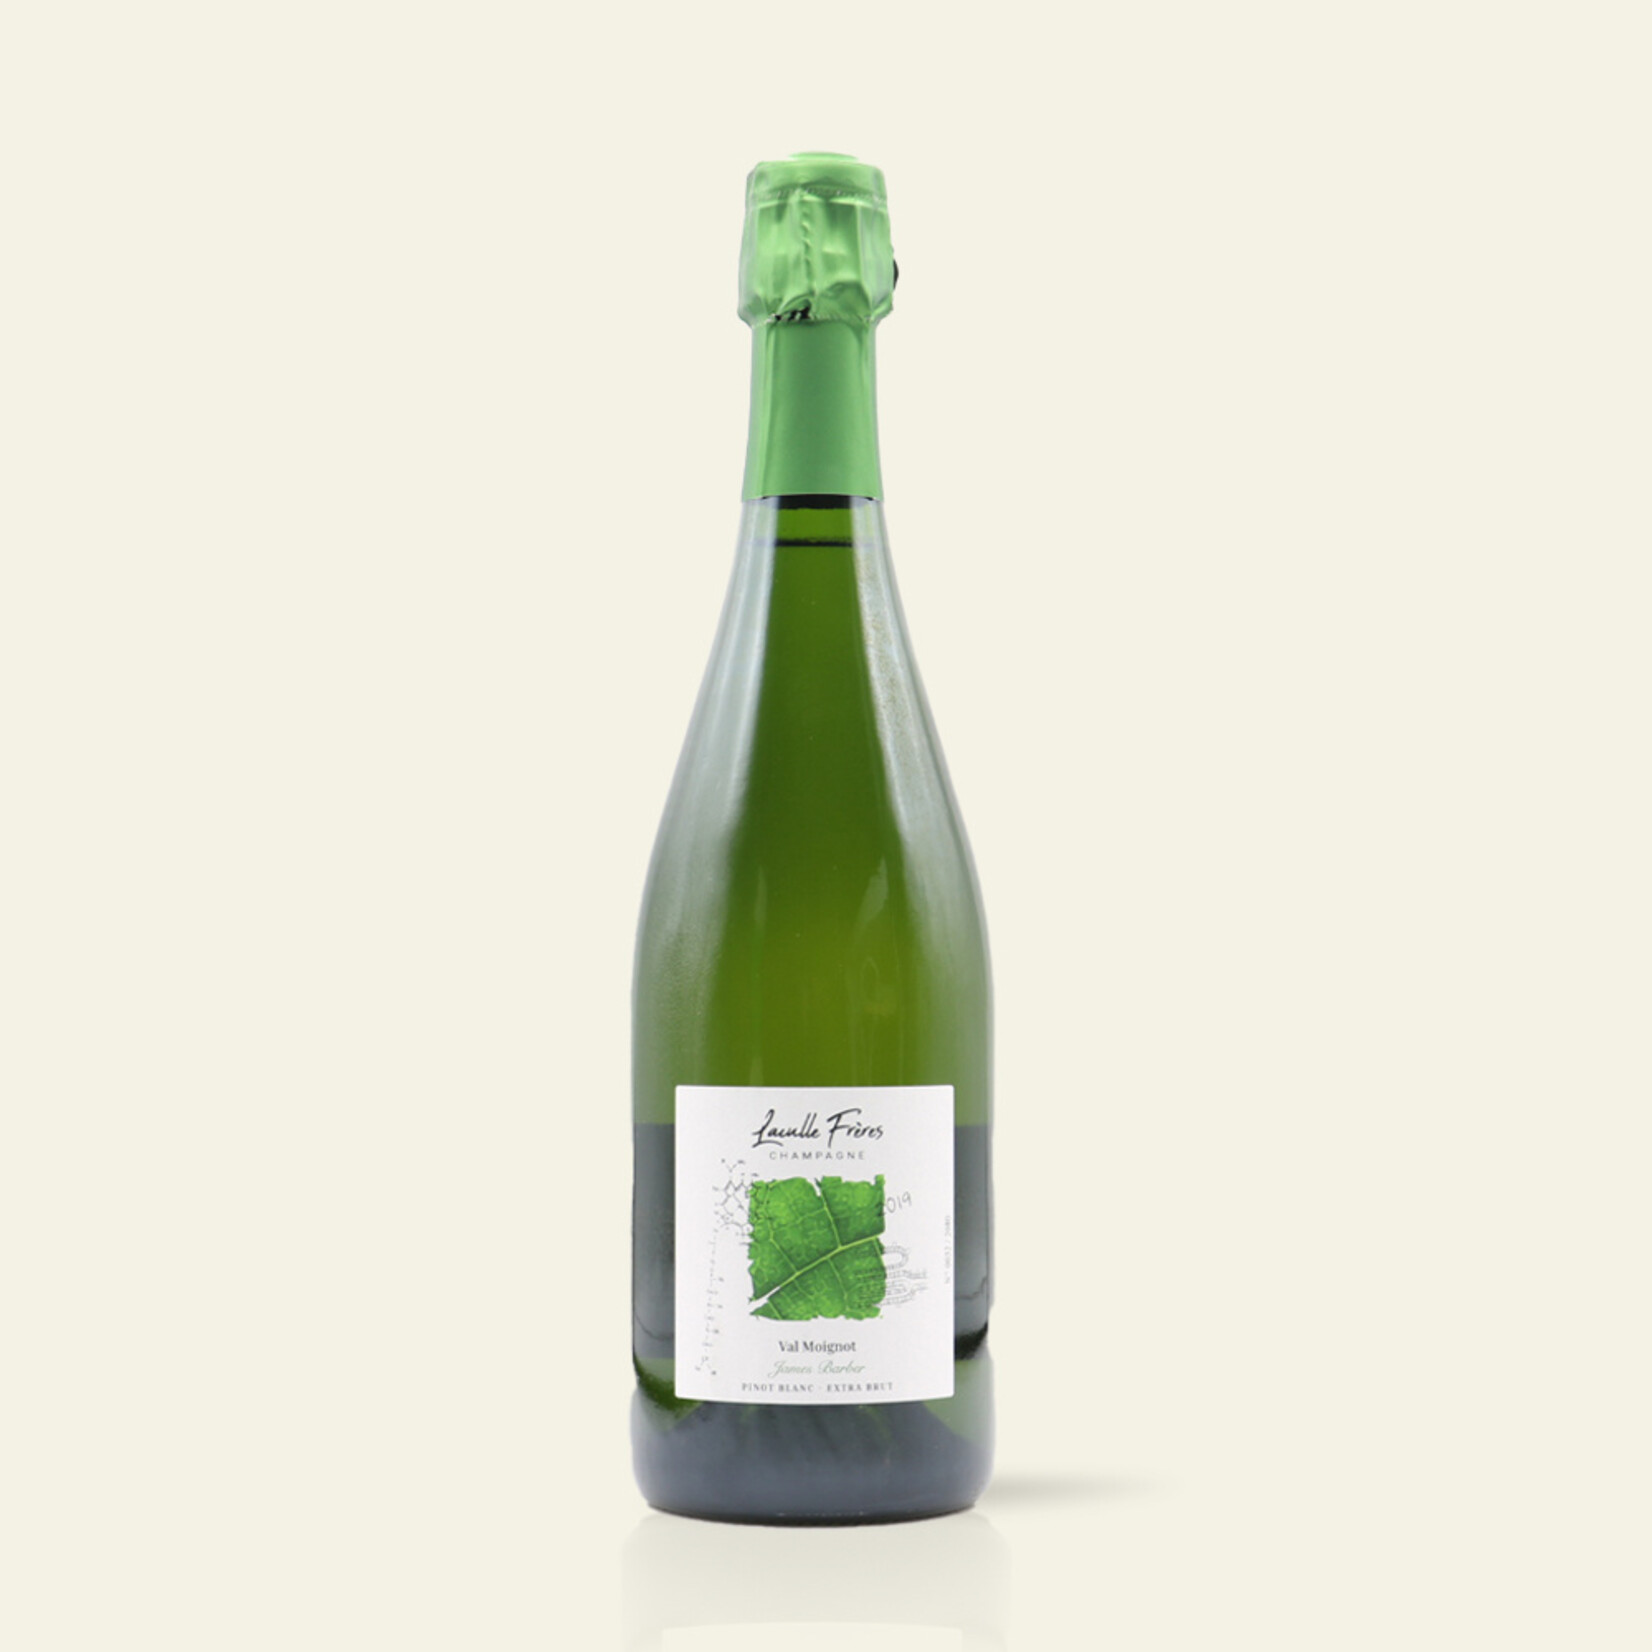 Laculle Fréres Vintage 2019 Val Moignot pinot blanc